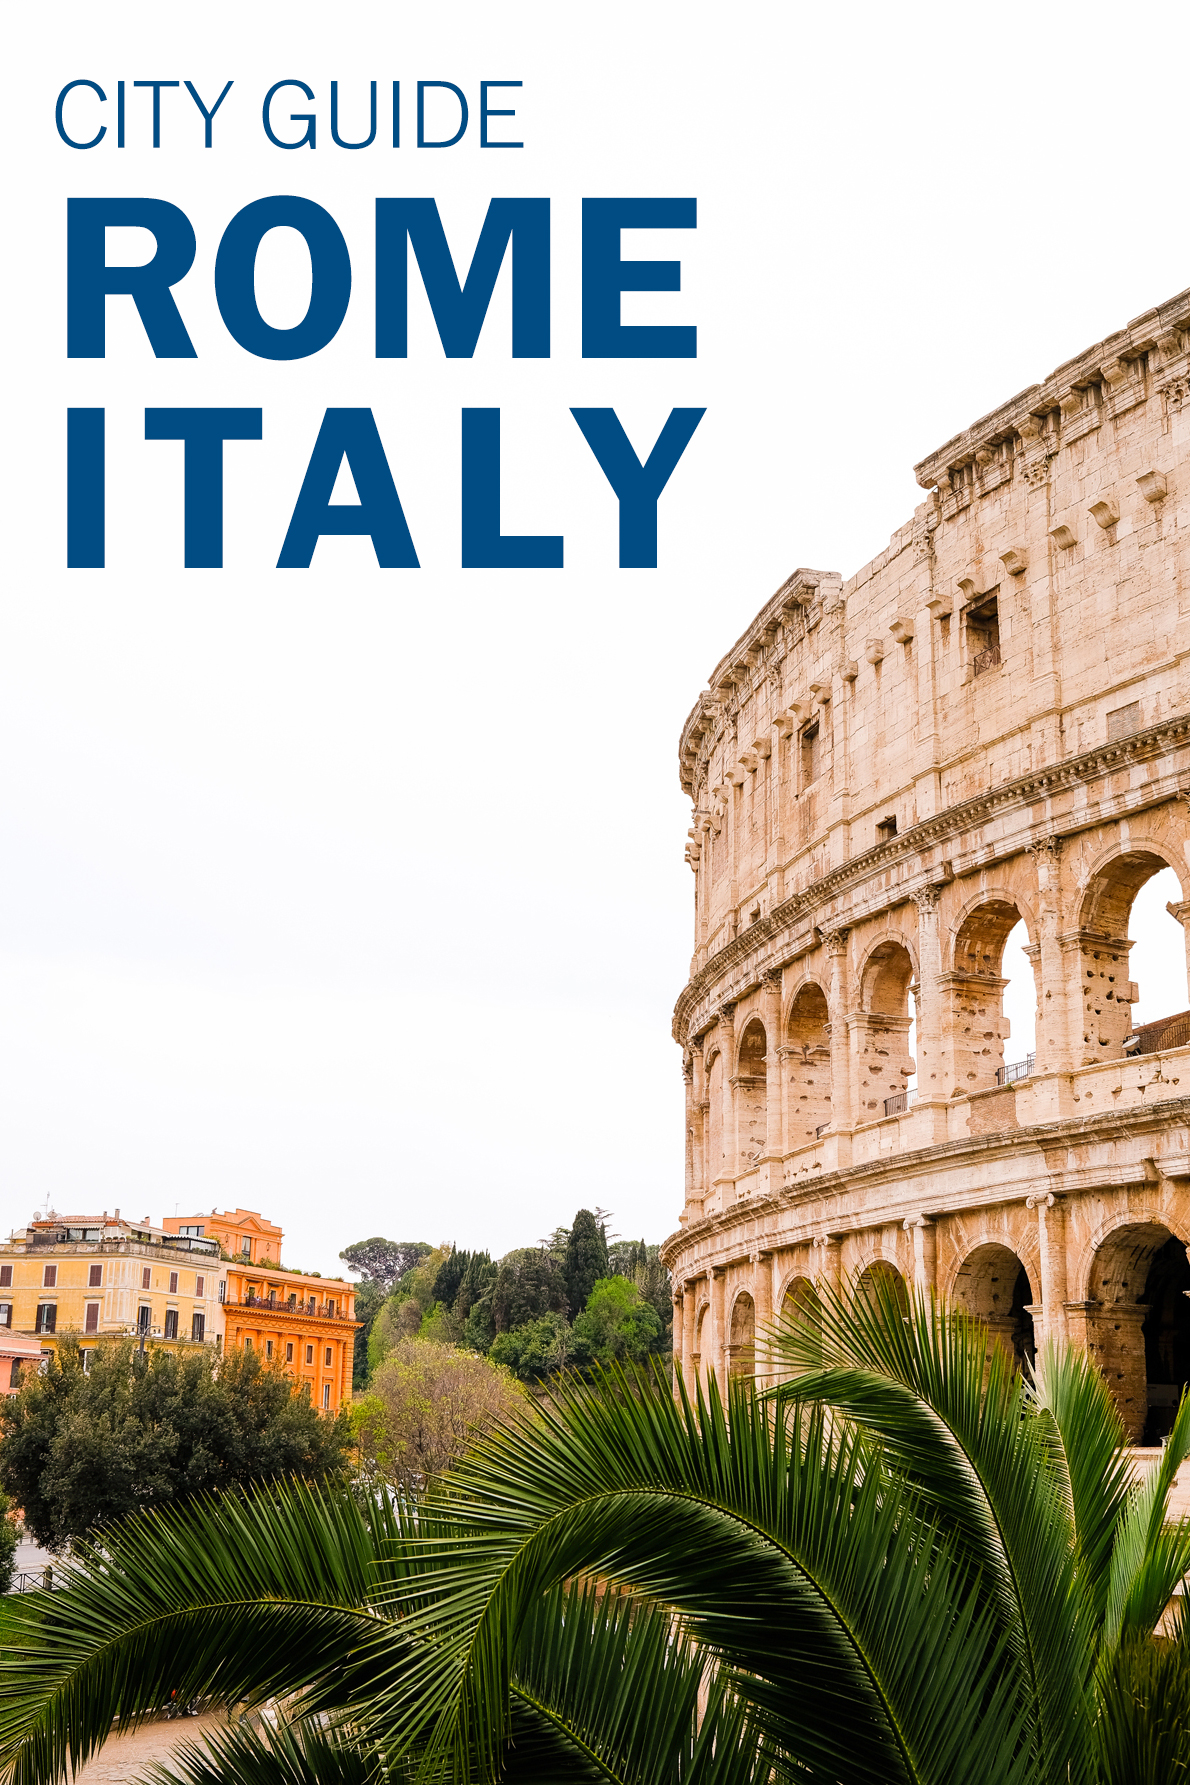 Heading to Rome for the first time? Be sure to check out this travel guide for what do to and what not to do while visiting Rome, Italy!